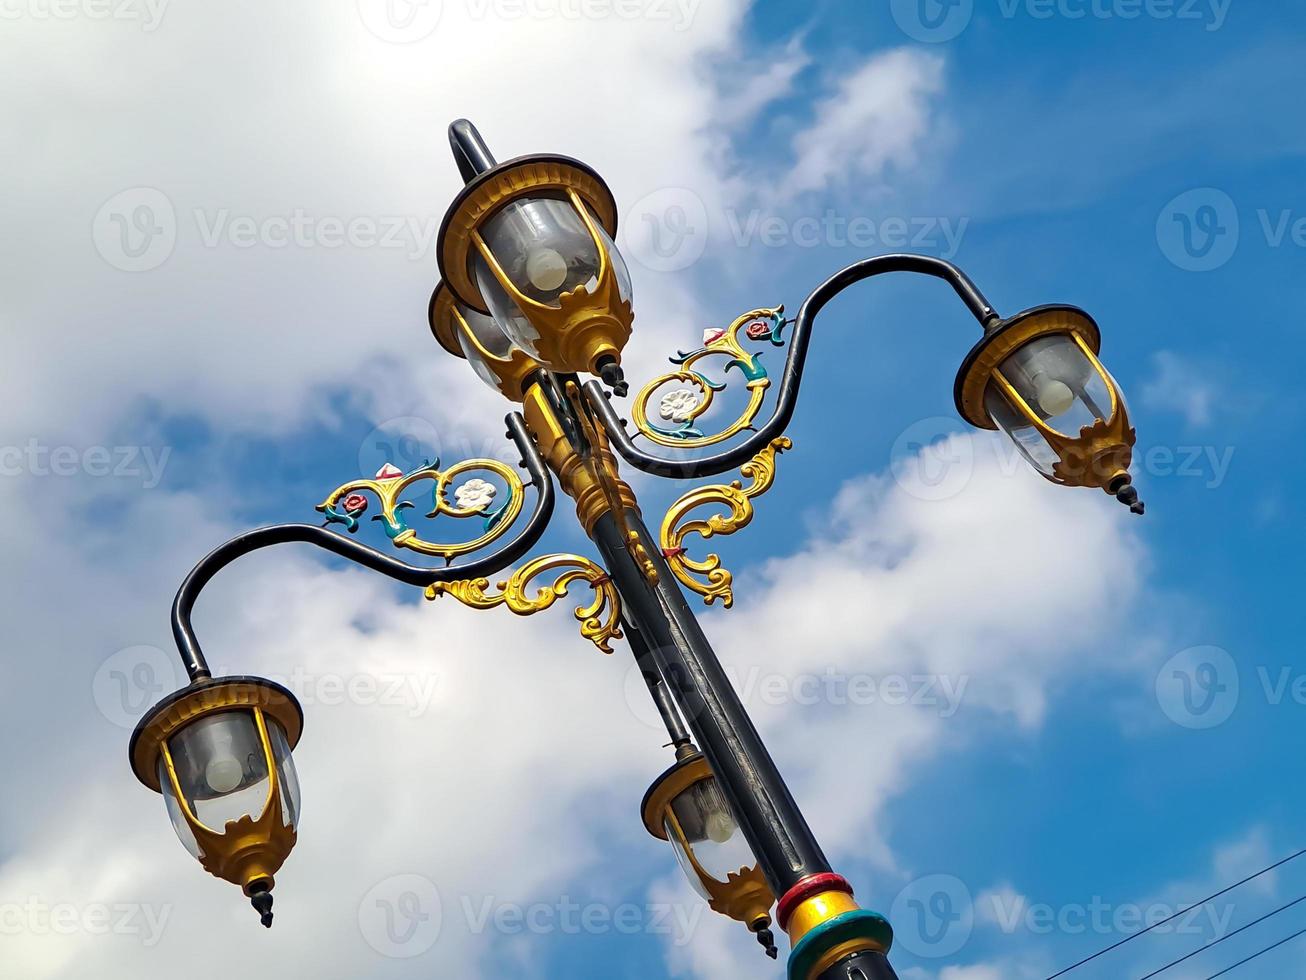 classic model city lights with black gold iron carvings, beautiful bright blue sky shot at low angle. photo